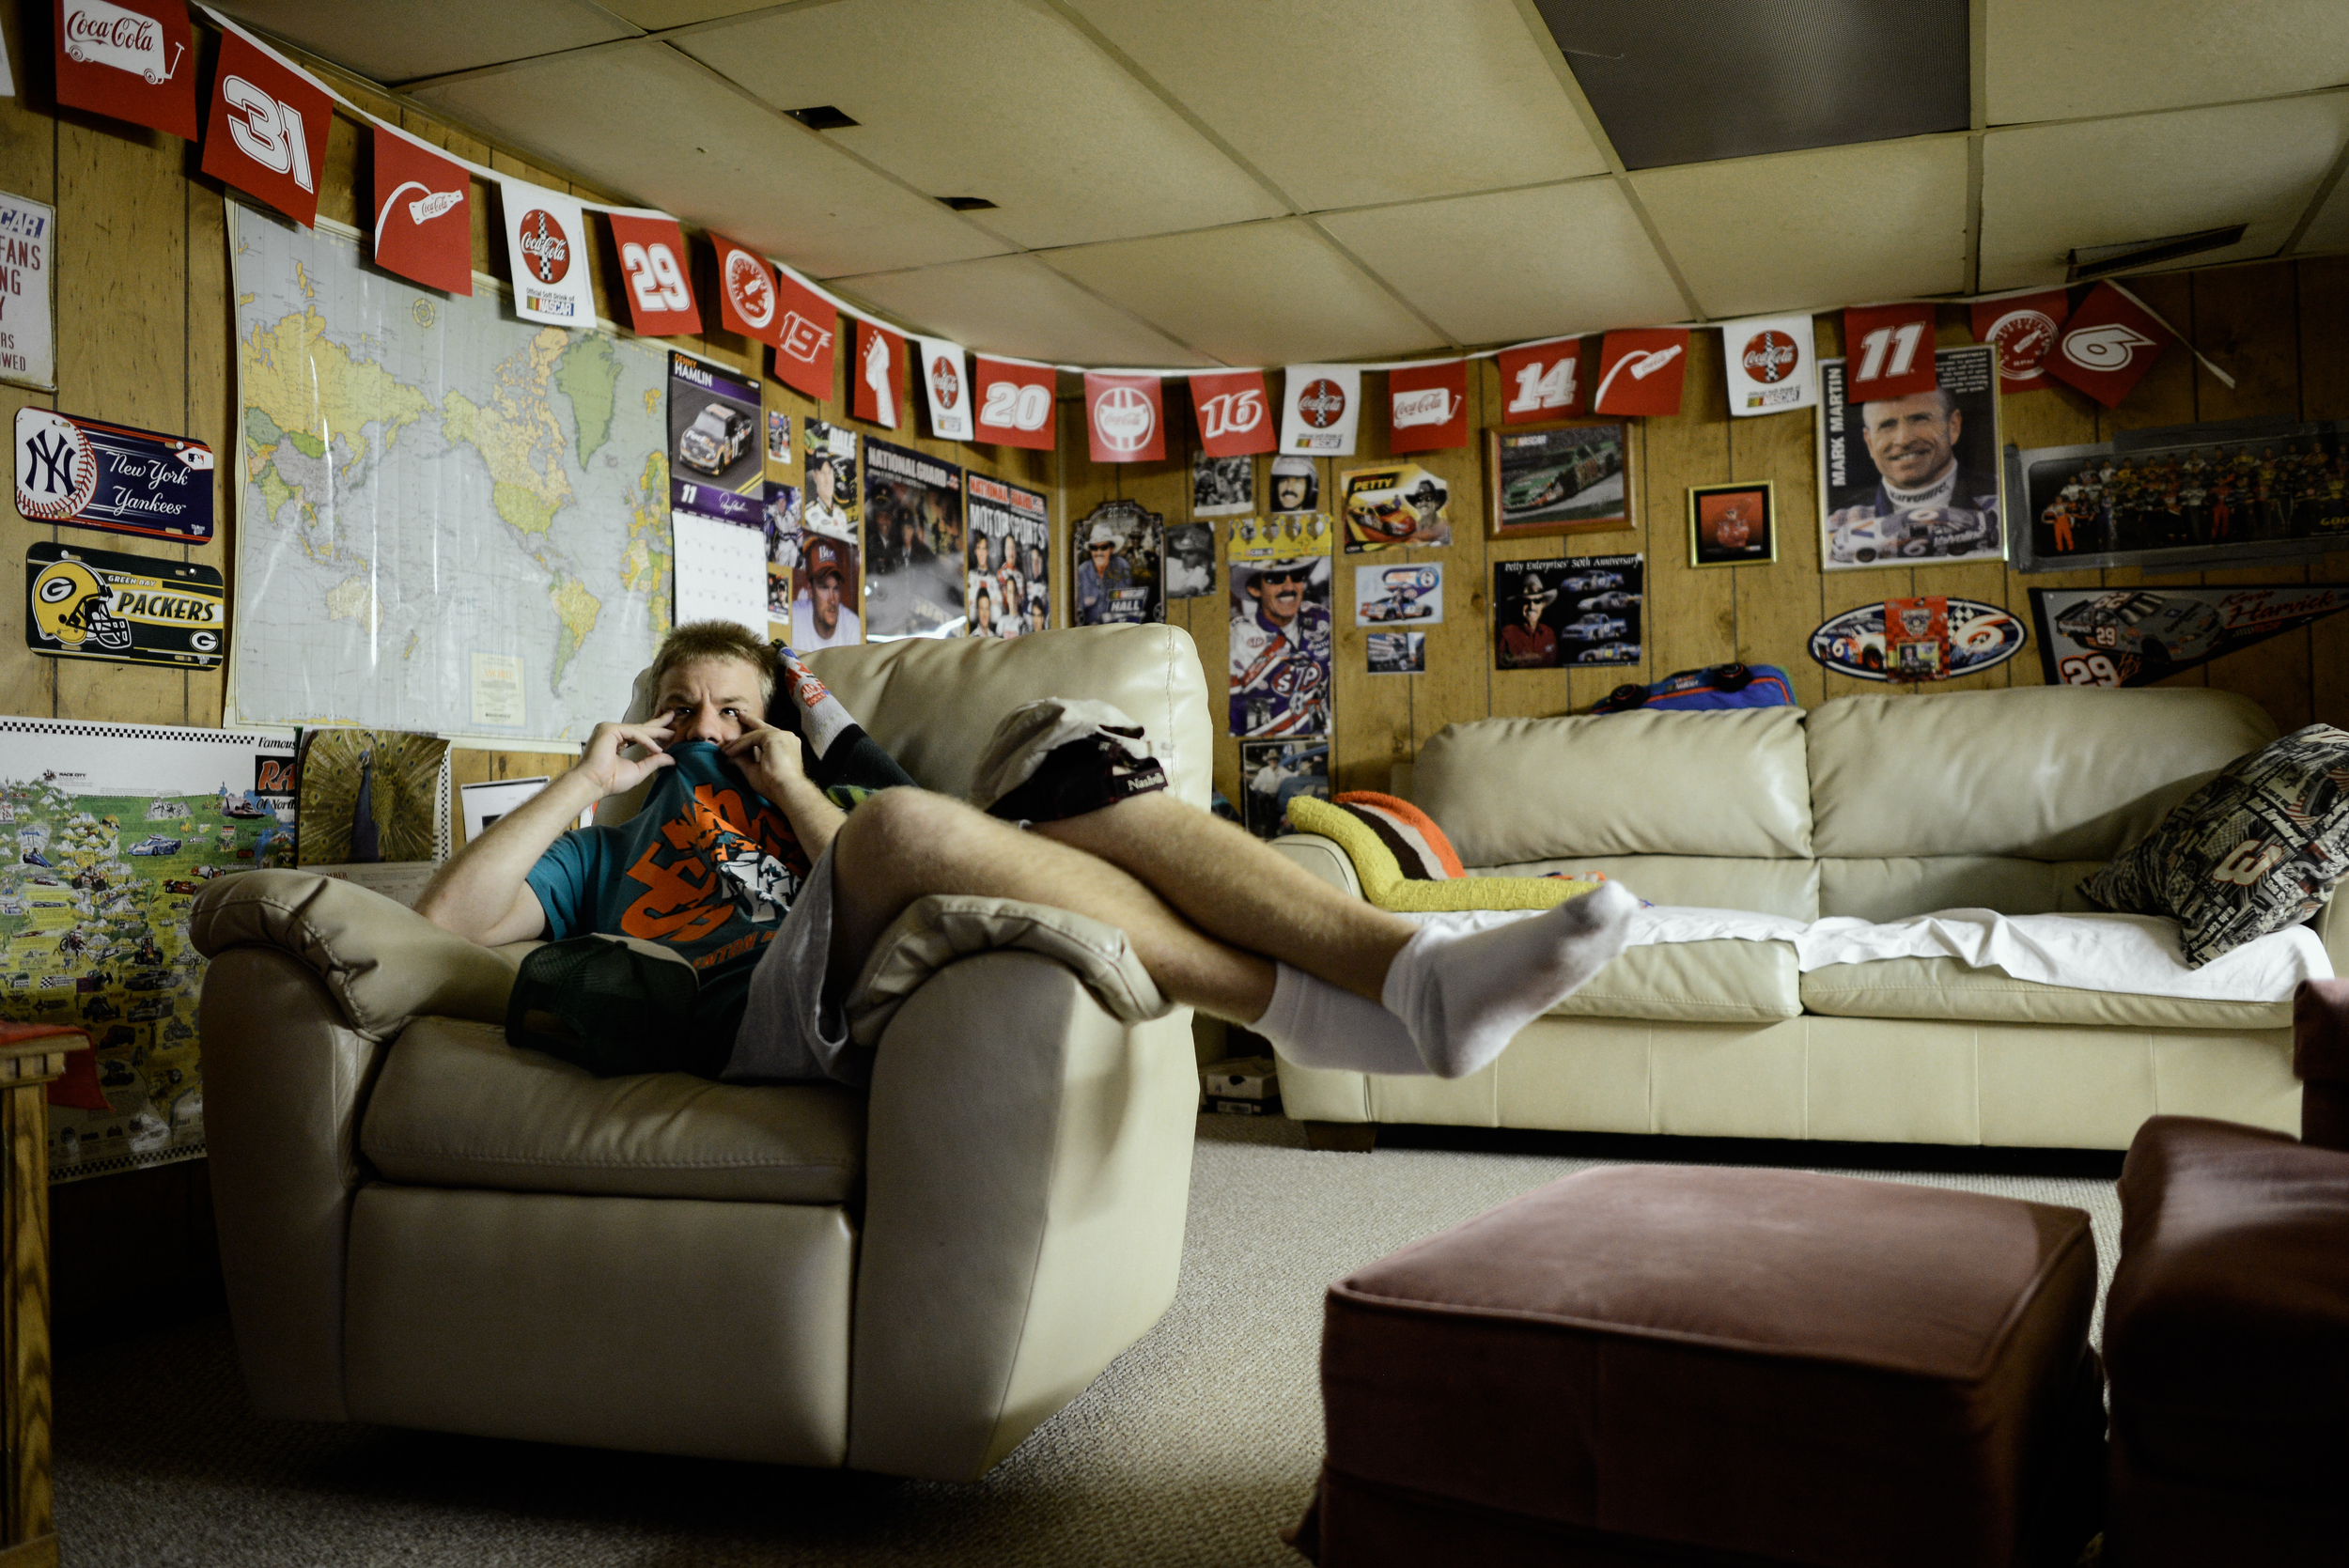  Trenton, Missouri. 2013.  Dalton watches television downstairs in his safe haven decorated with his favorite sports memorabilia. He finds comfort in sitting with his hands and shirt on his face when he watches television. 